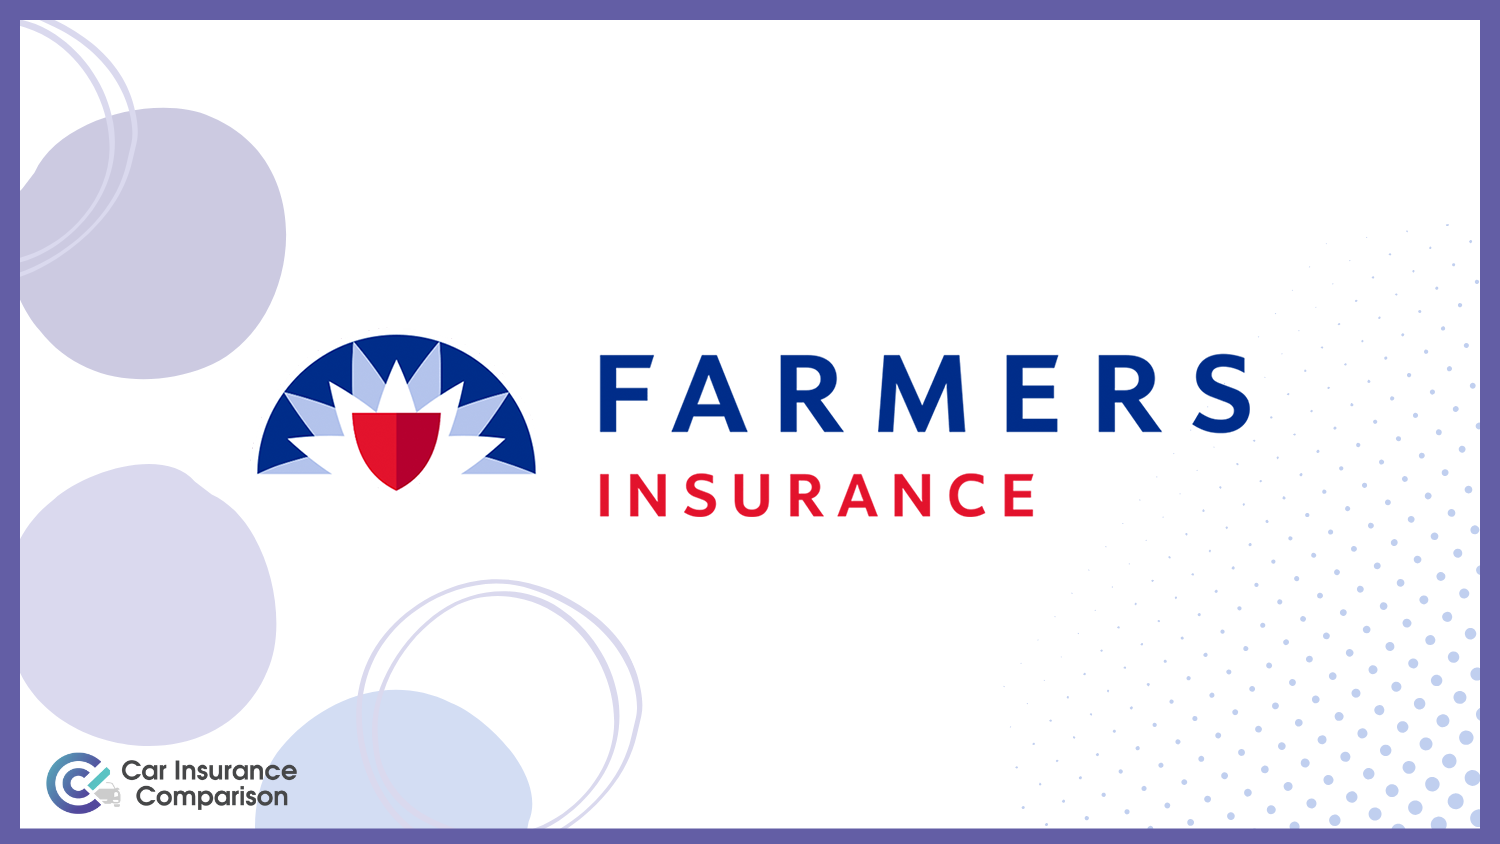 Farmers: 10 Best Companies for Bundling Home and Car Insurance